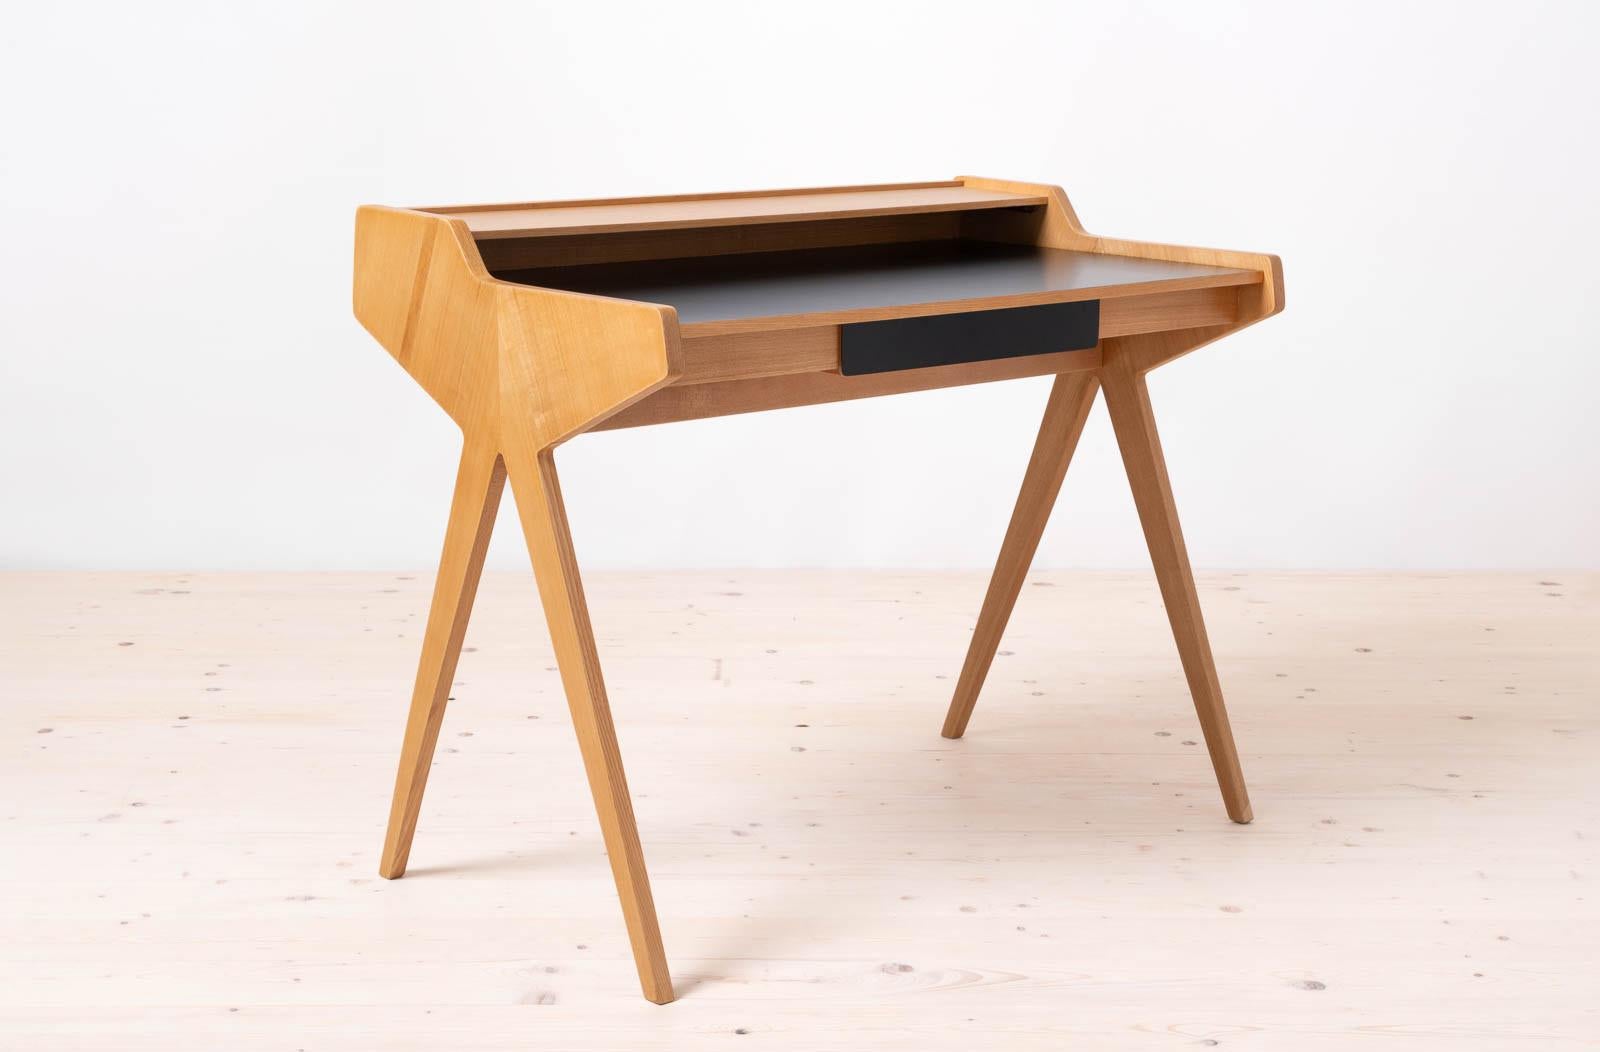 This is the famous desk designed by Helmut Magg, also known as „Lady Desk”. Produced by Neue Gemeinschaft für Wohnkultur, WK Möbel in 1950s. The design is simple yet very elegant. It features one practical drawer and a shelf above the top. The desk